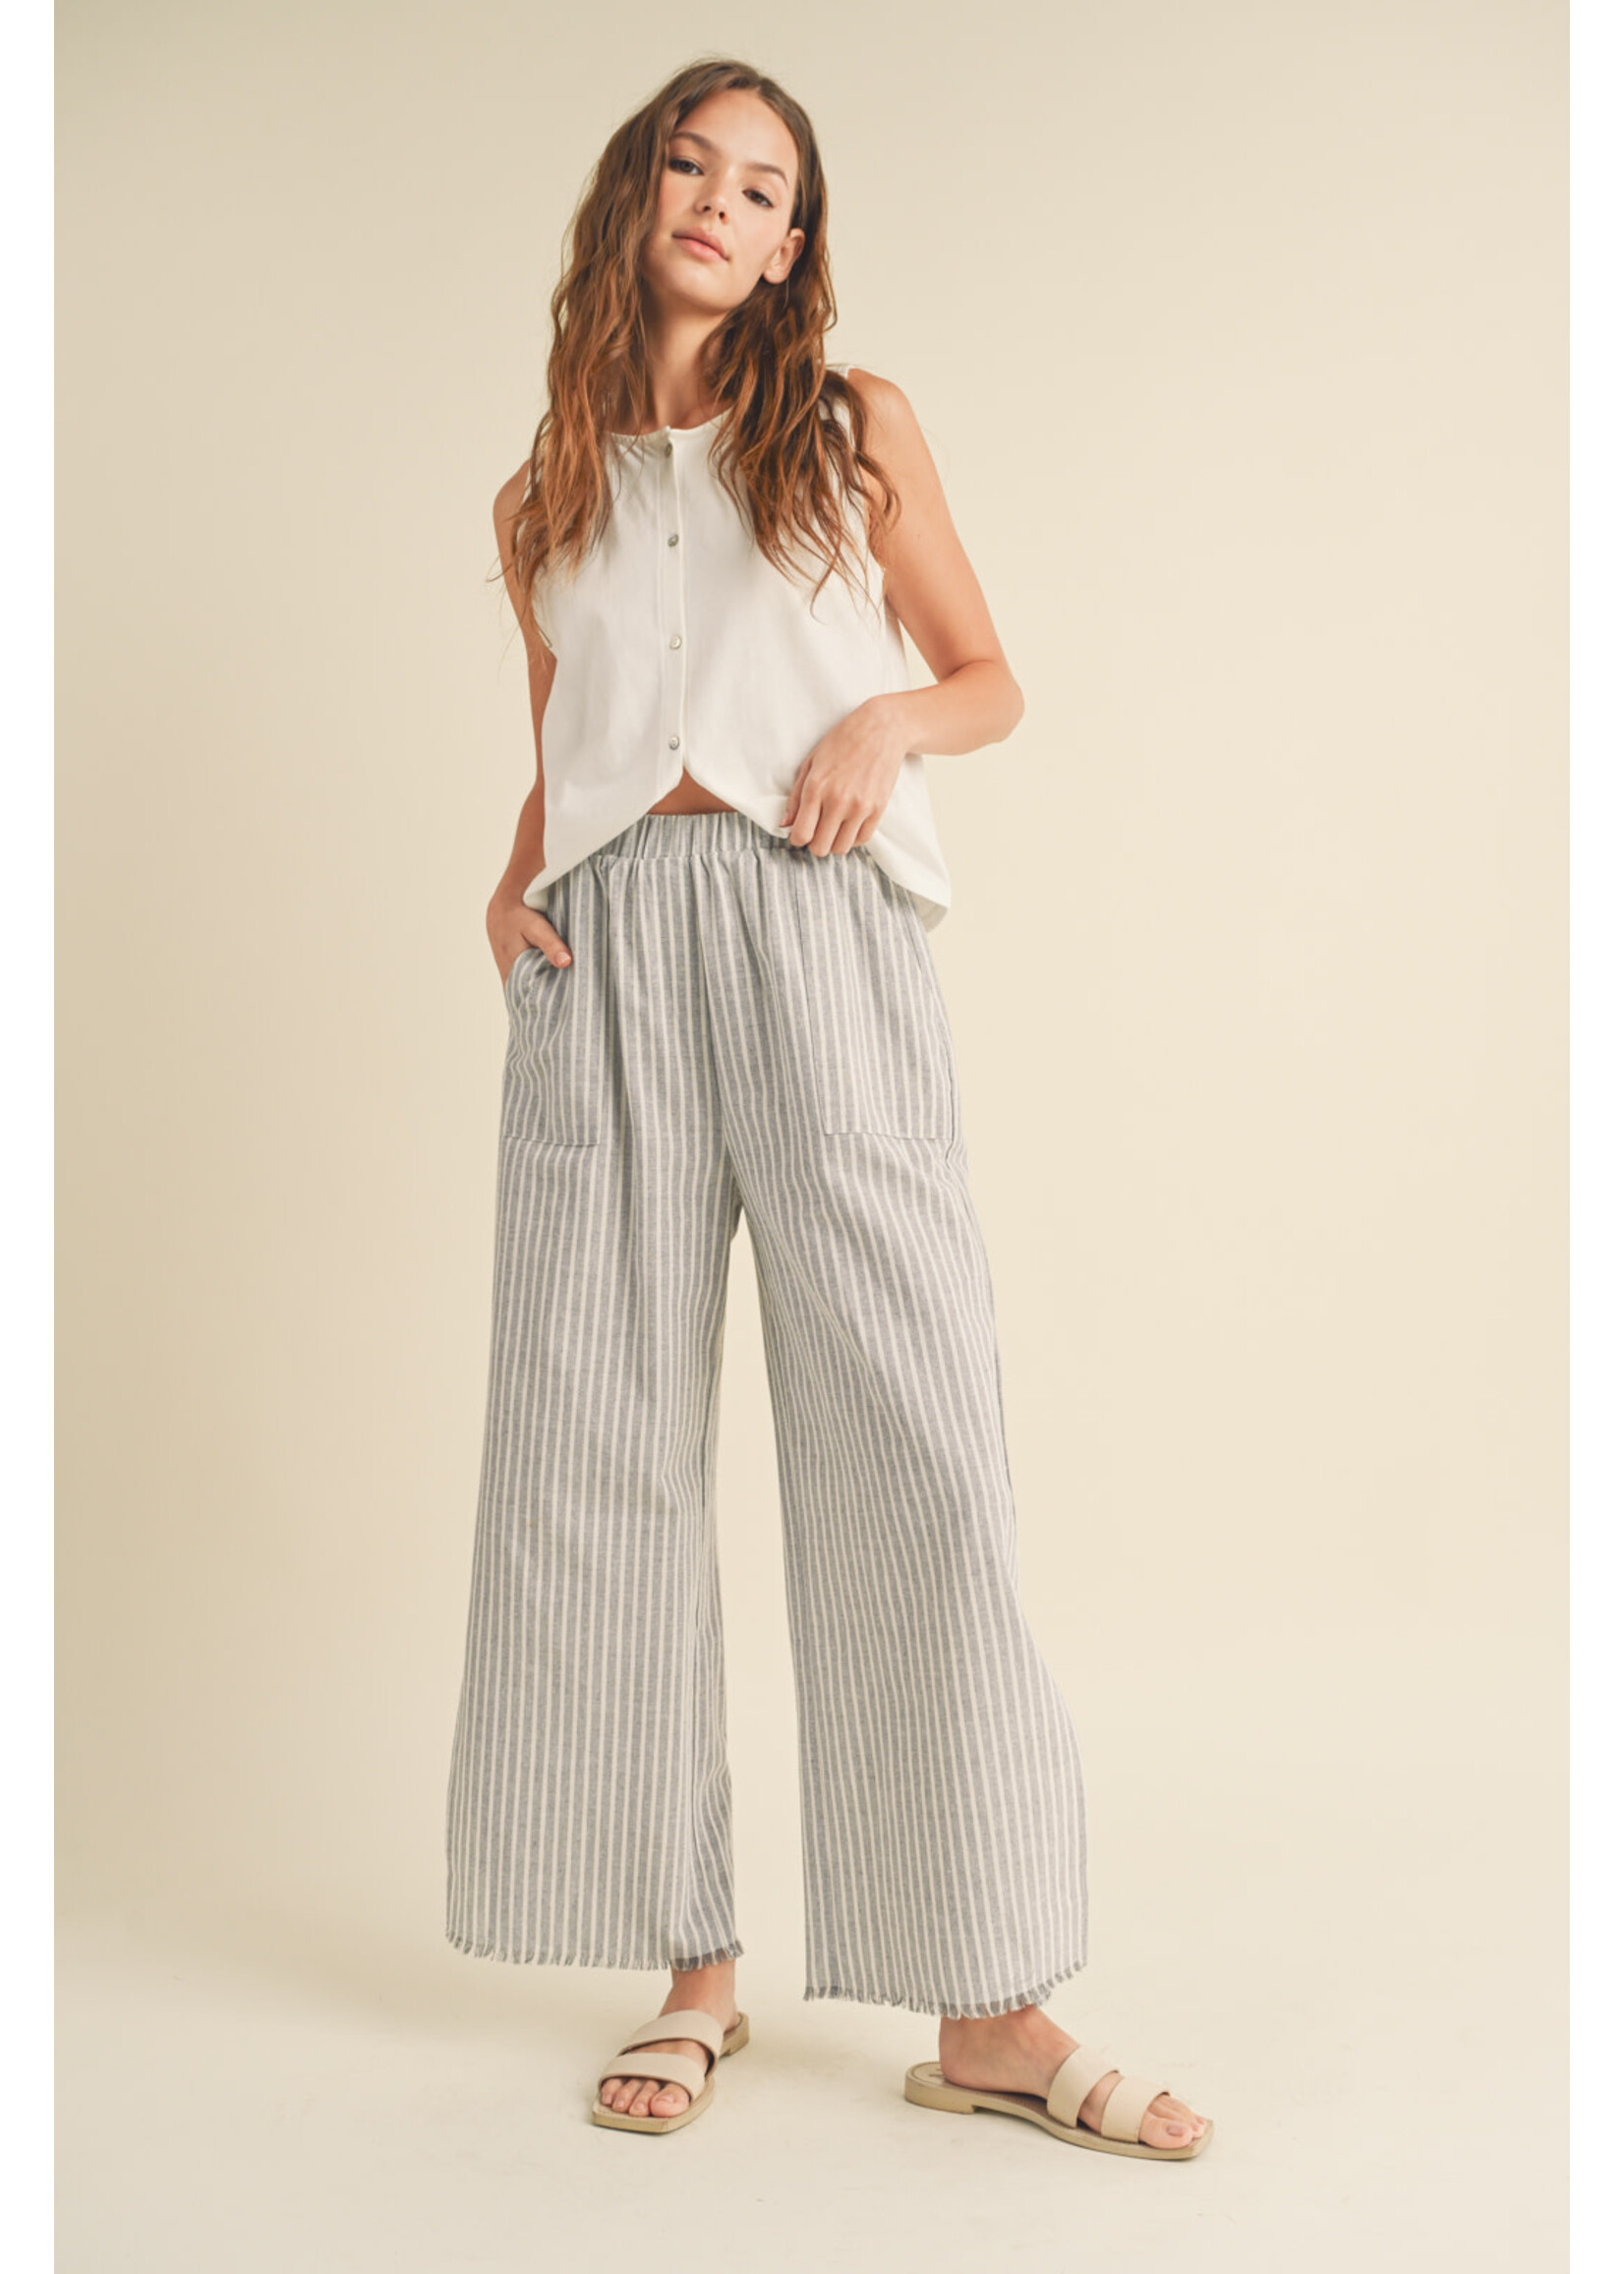 STRIPED LINEN PANTS WITH RAW EDGE DETAIL